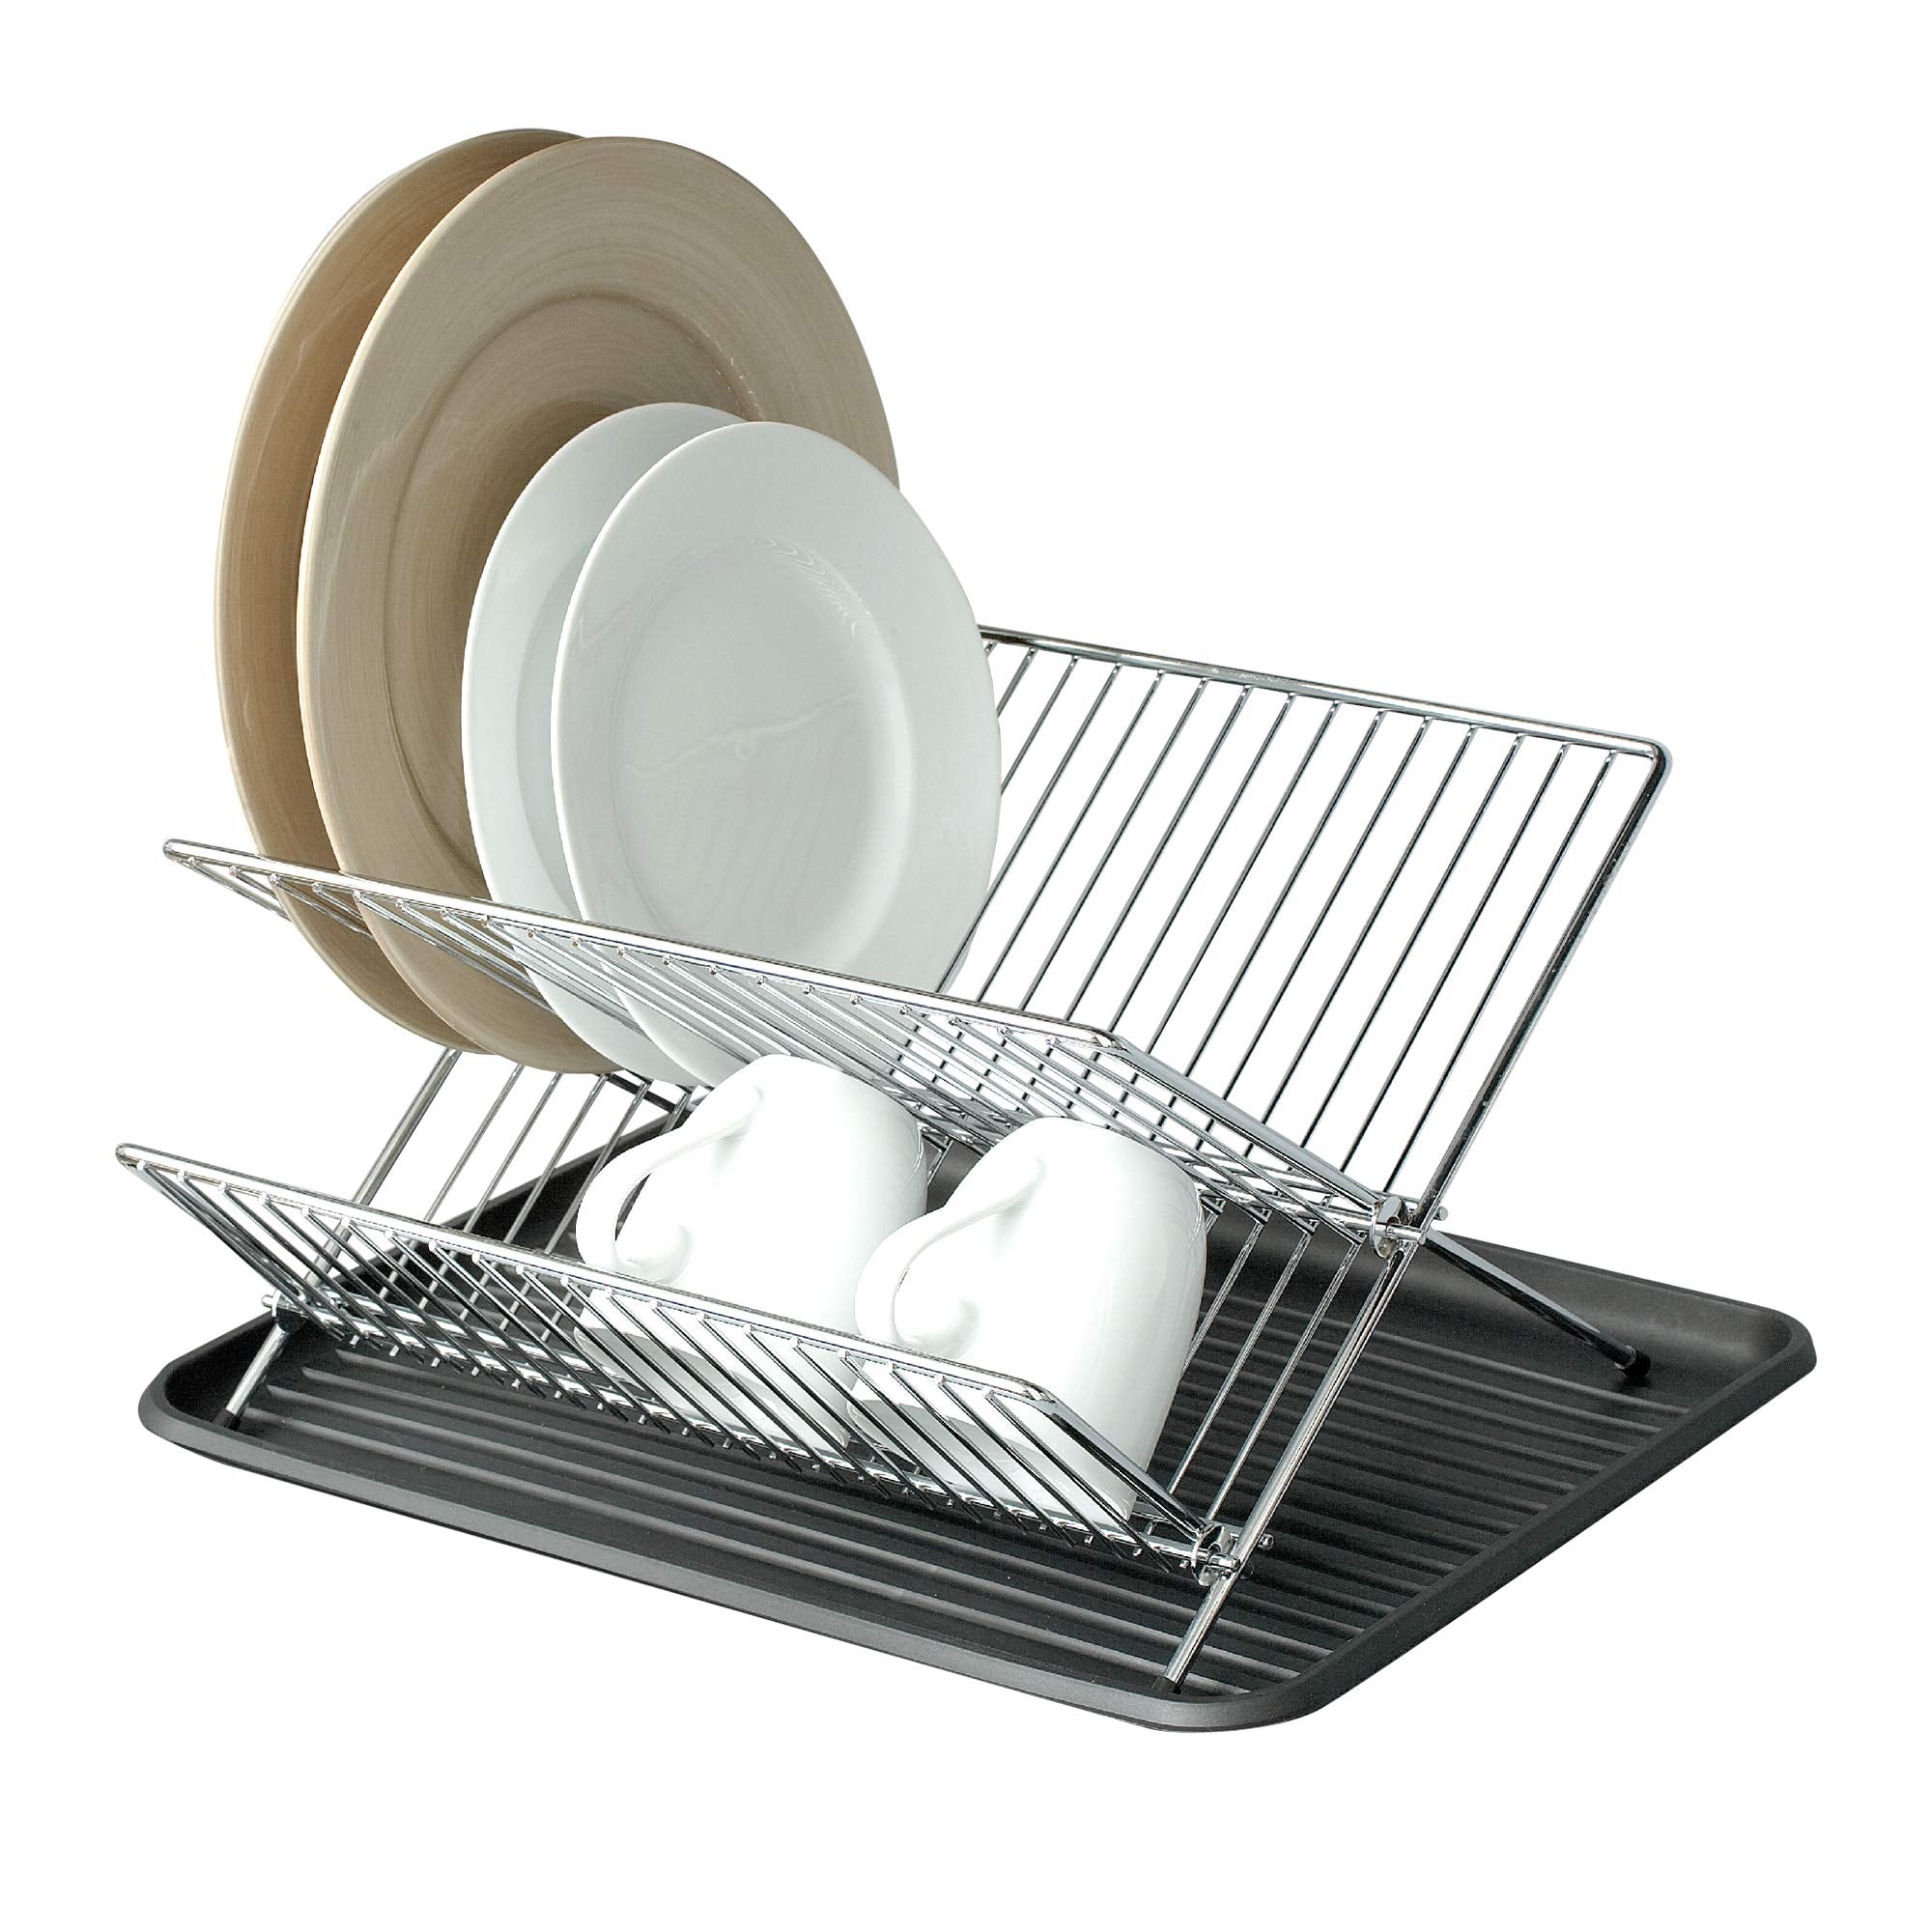 Dish Drainer Rack with In-Sink or Counter Drying - Chrome - Smart Design® 1